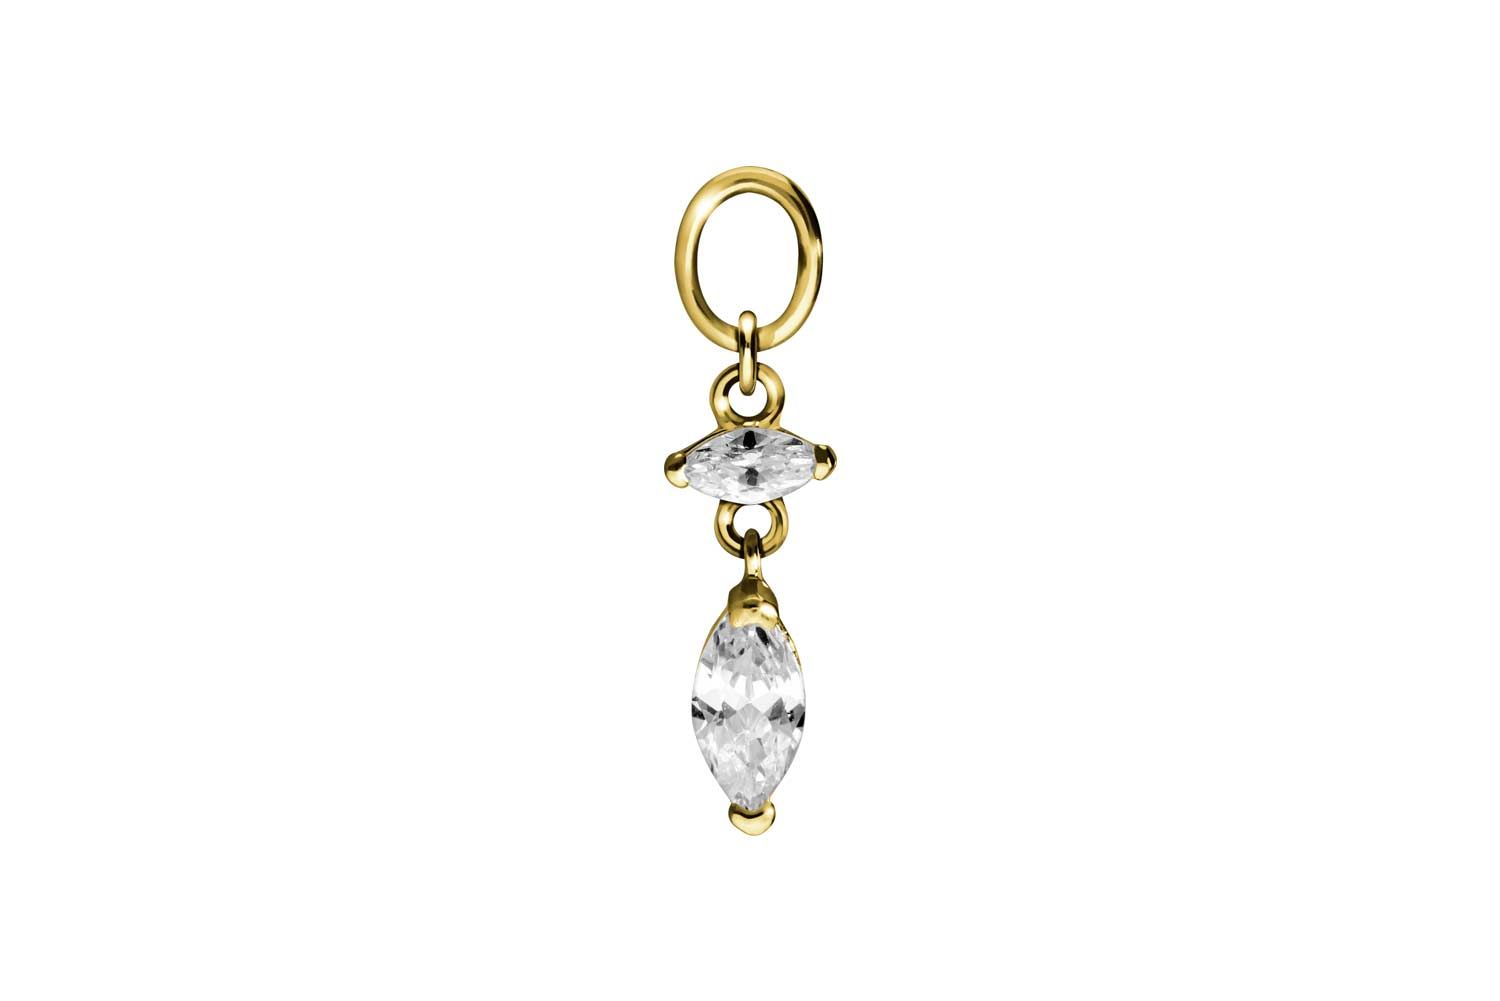 18 carat gold pendant for clickers 2 SETTED CRYSTAL DROPS